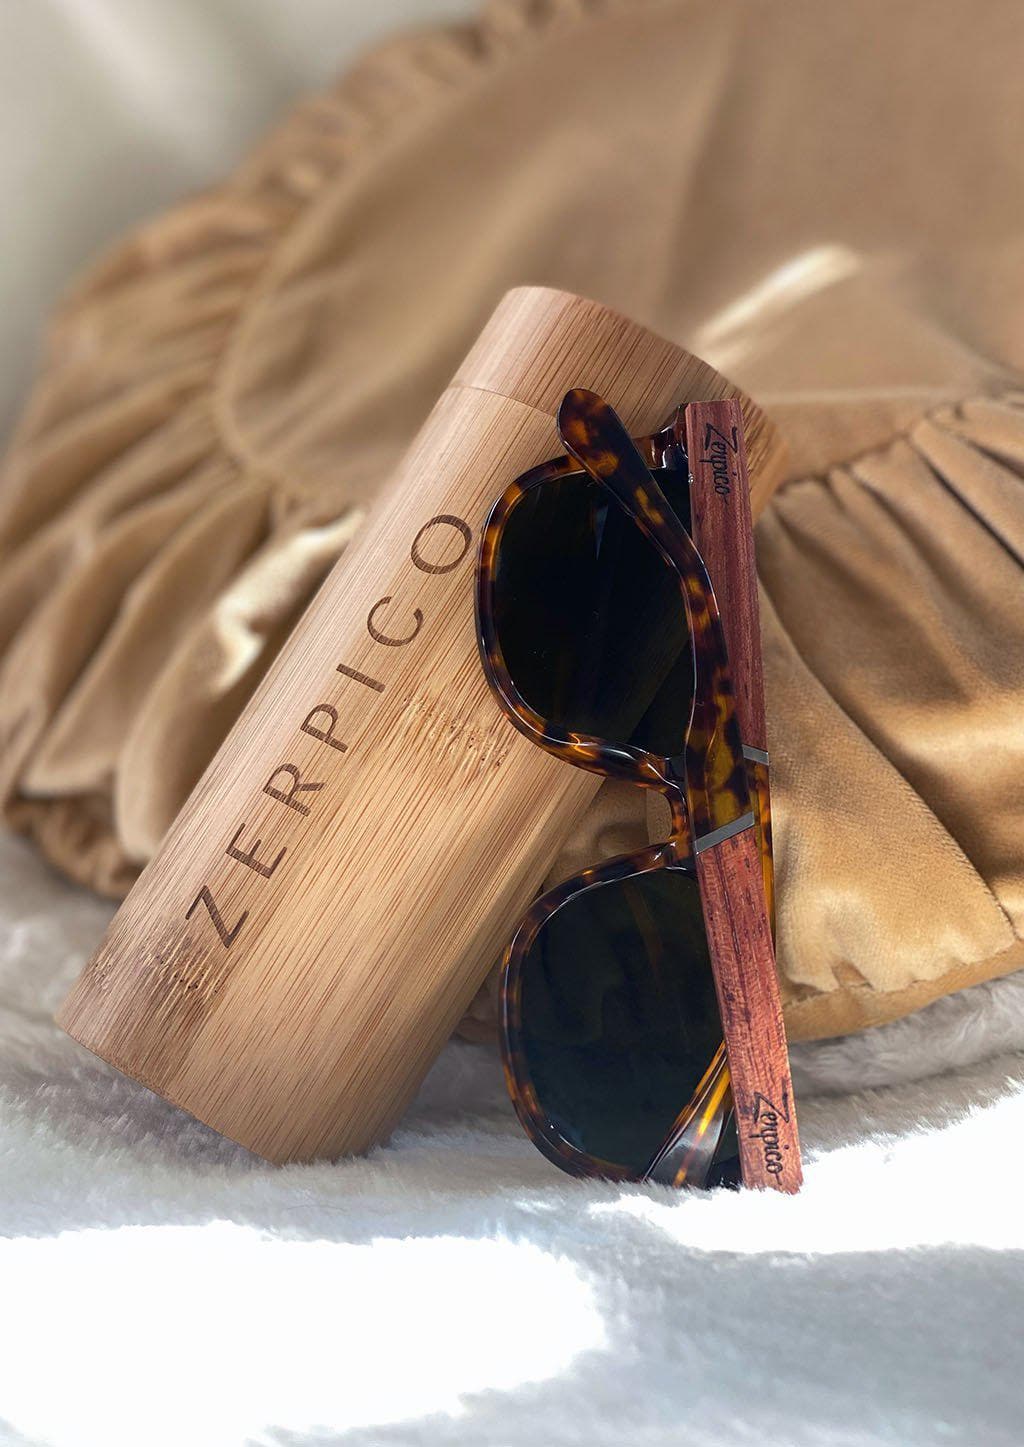 Eyewood Wayfarers - Fusion - Lynx - A mix of acetate and wood makes theses sunglasses unique. Details with the special wooden case.